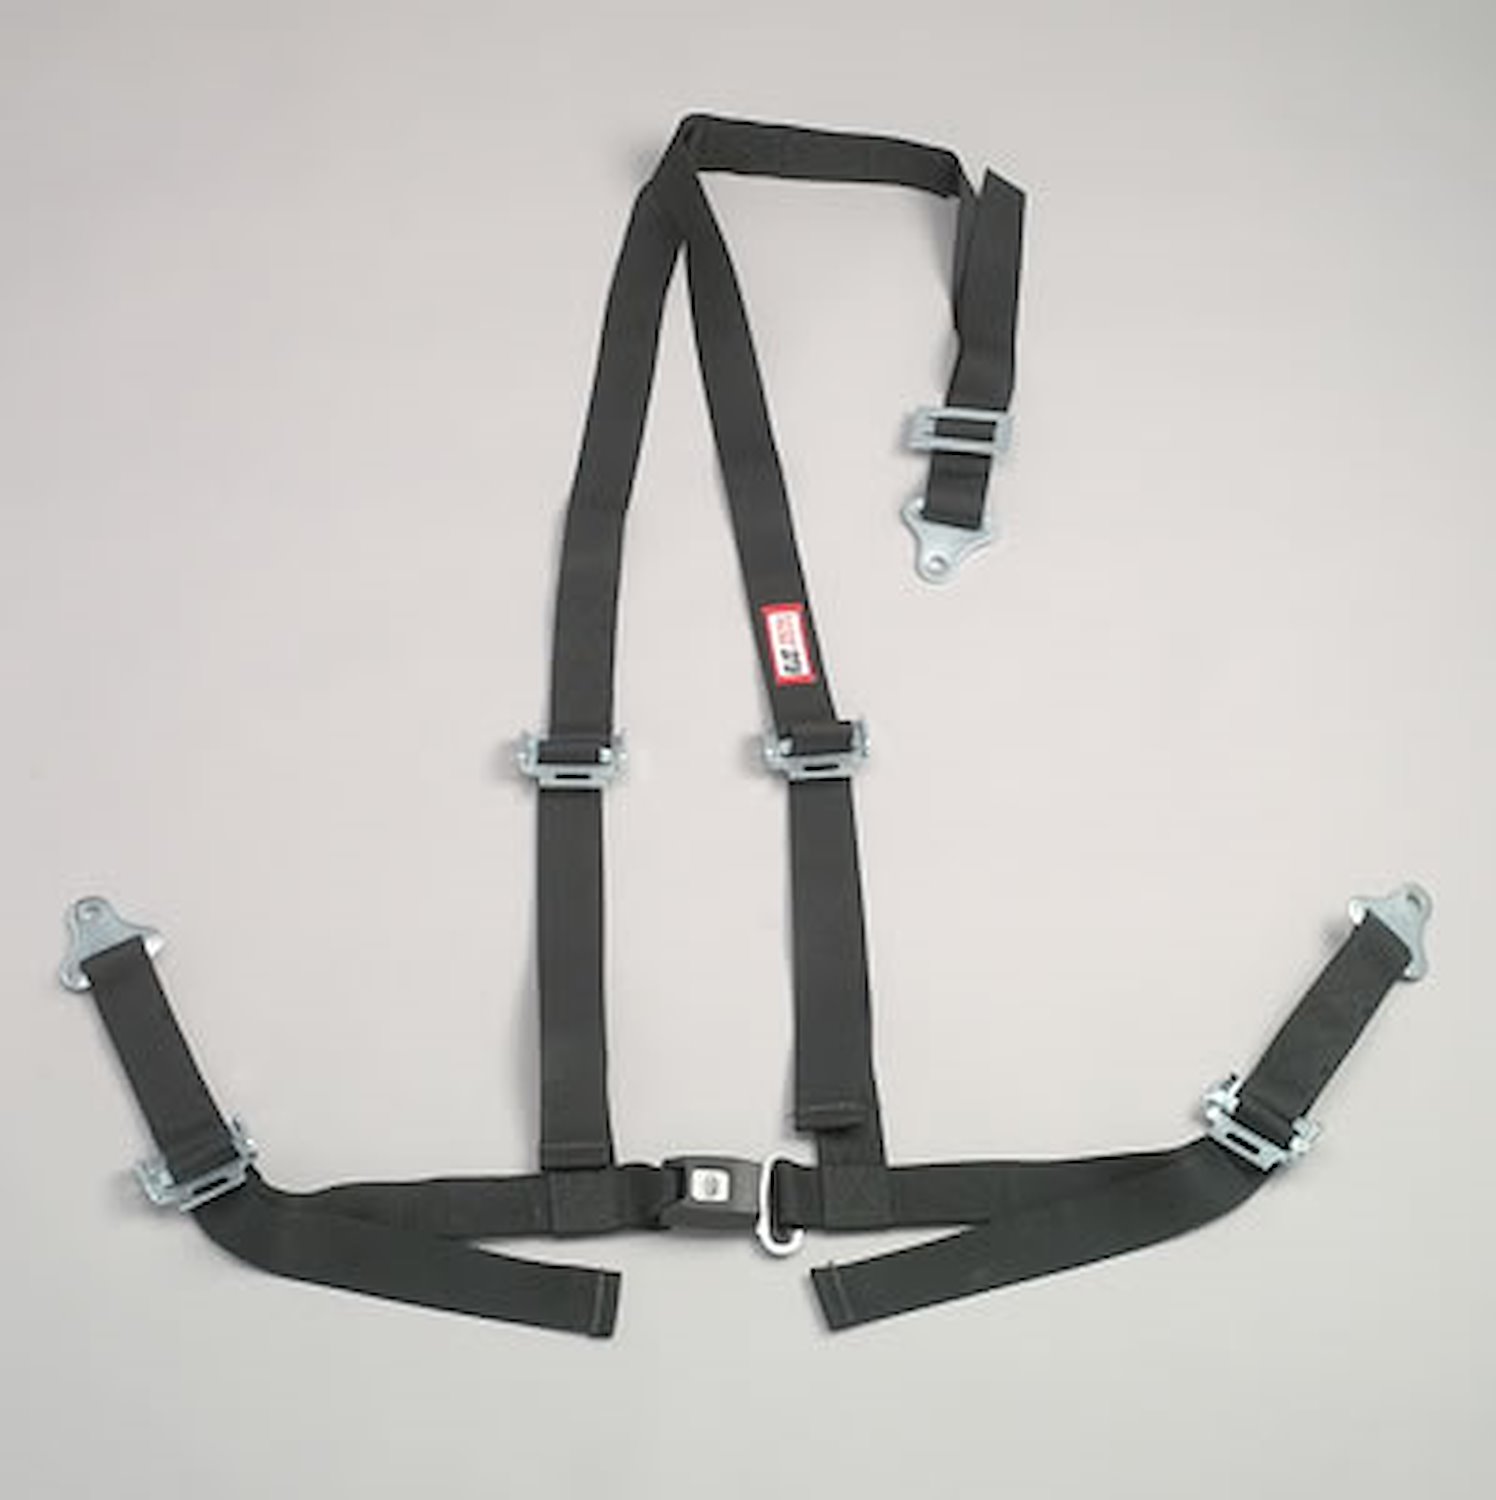 NON-SFI B&T HARNESS 2 PULL UP Lap Belt 2 S. H. Individual ROLL BAR Mount ALL WRAP ENDS w/STERNUM STRAP ORANGE